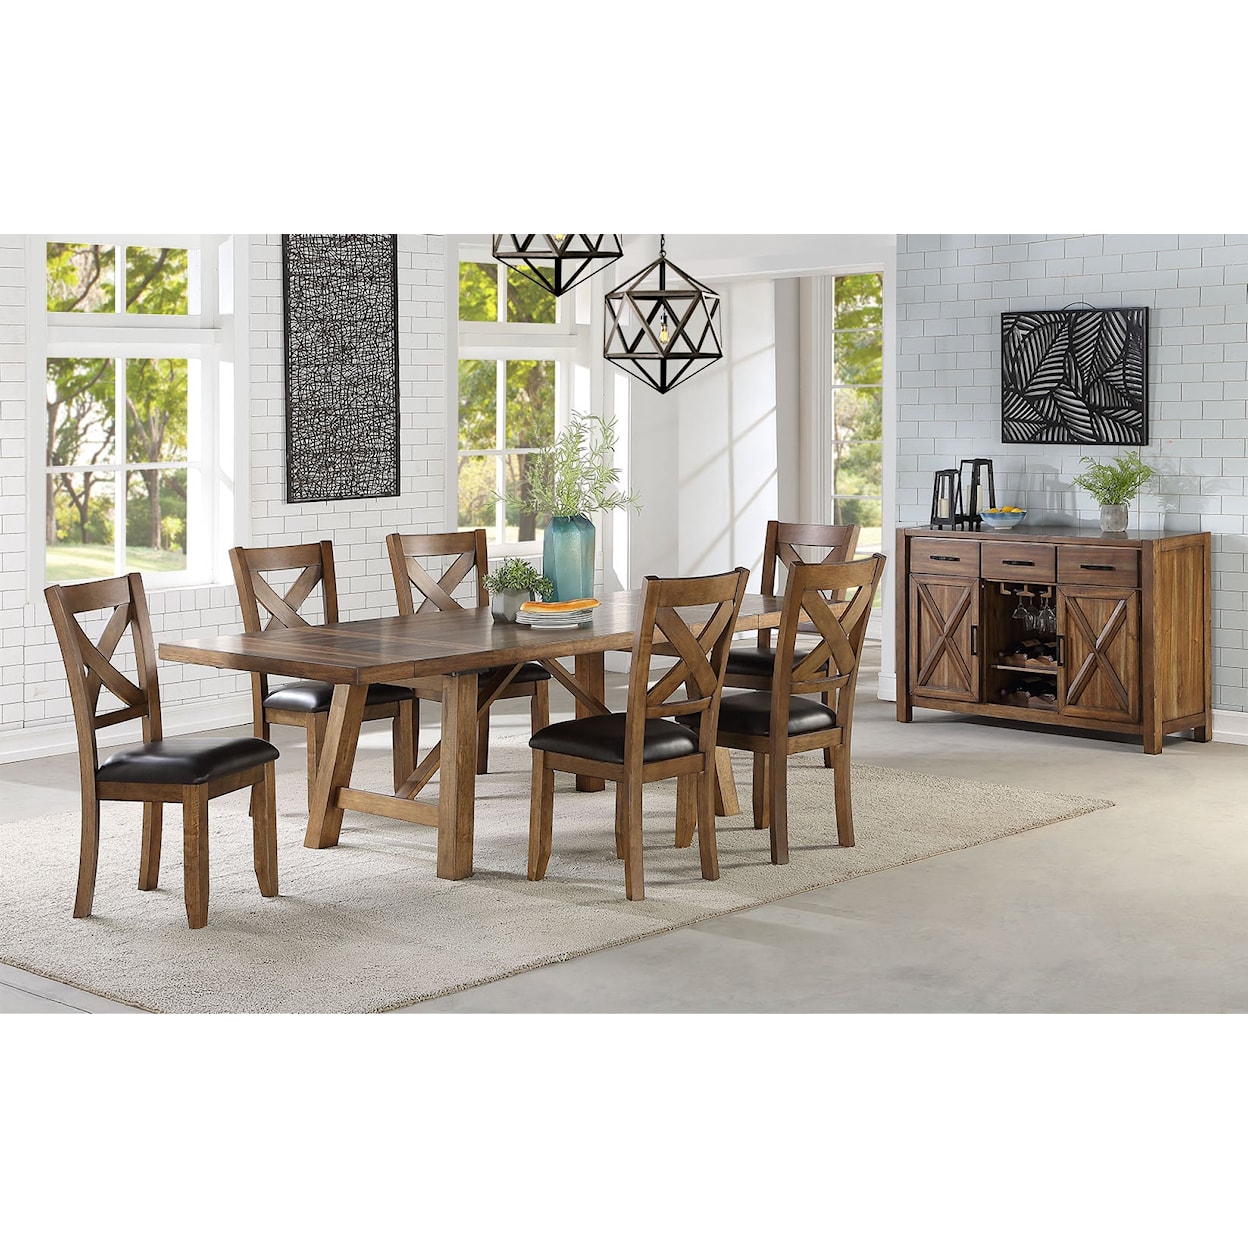 Emerald Darby Rectangular Dining Table with Table Leaves